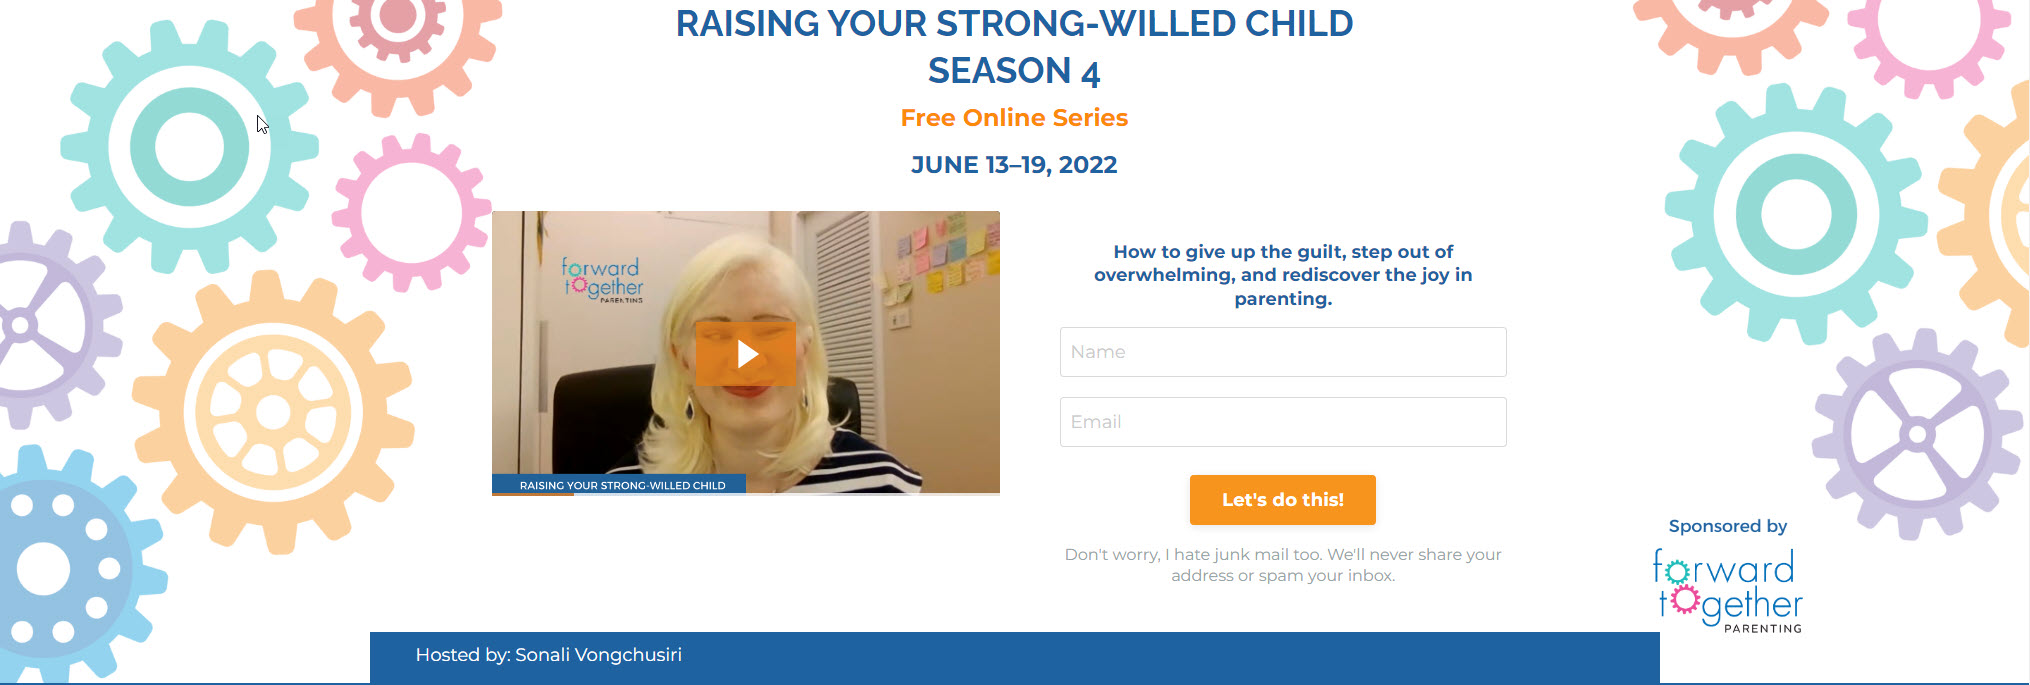 Image of the Registration Page for Raising Your Strong Willed Child Season 4